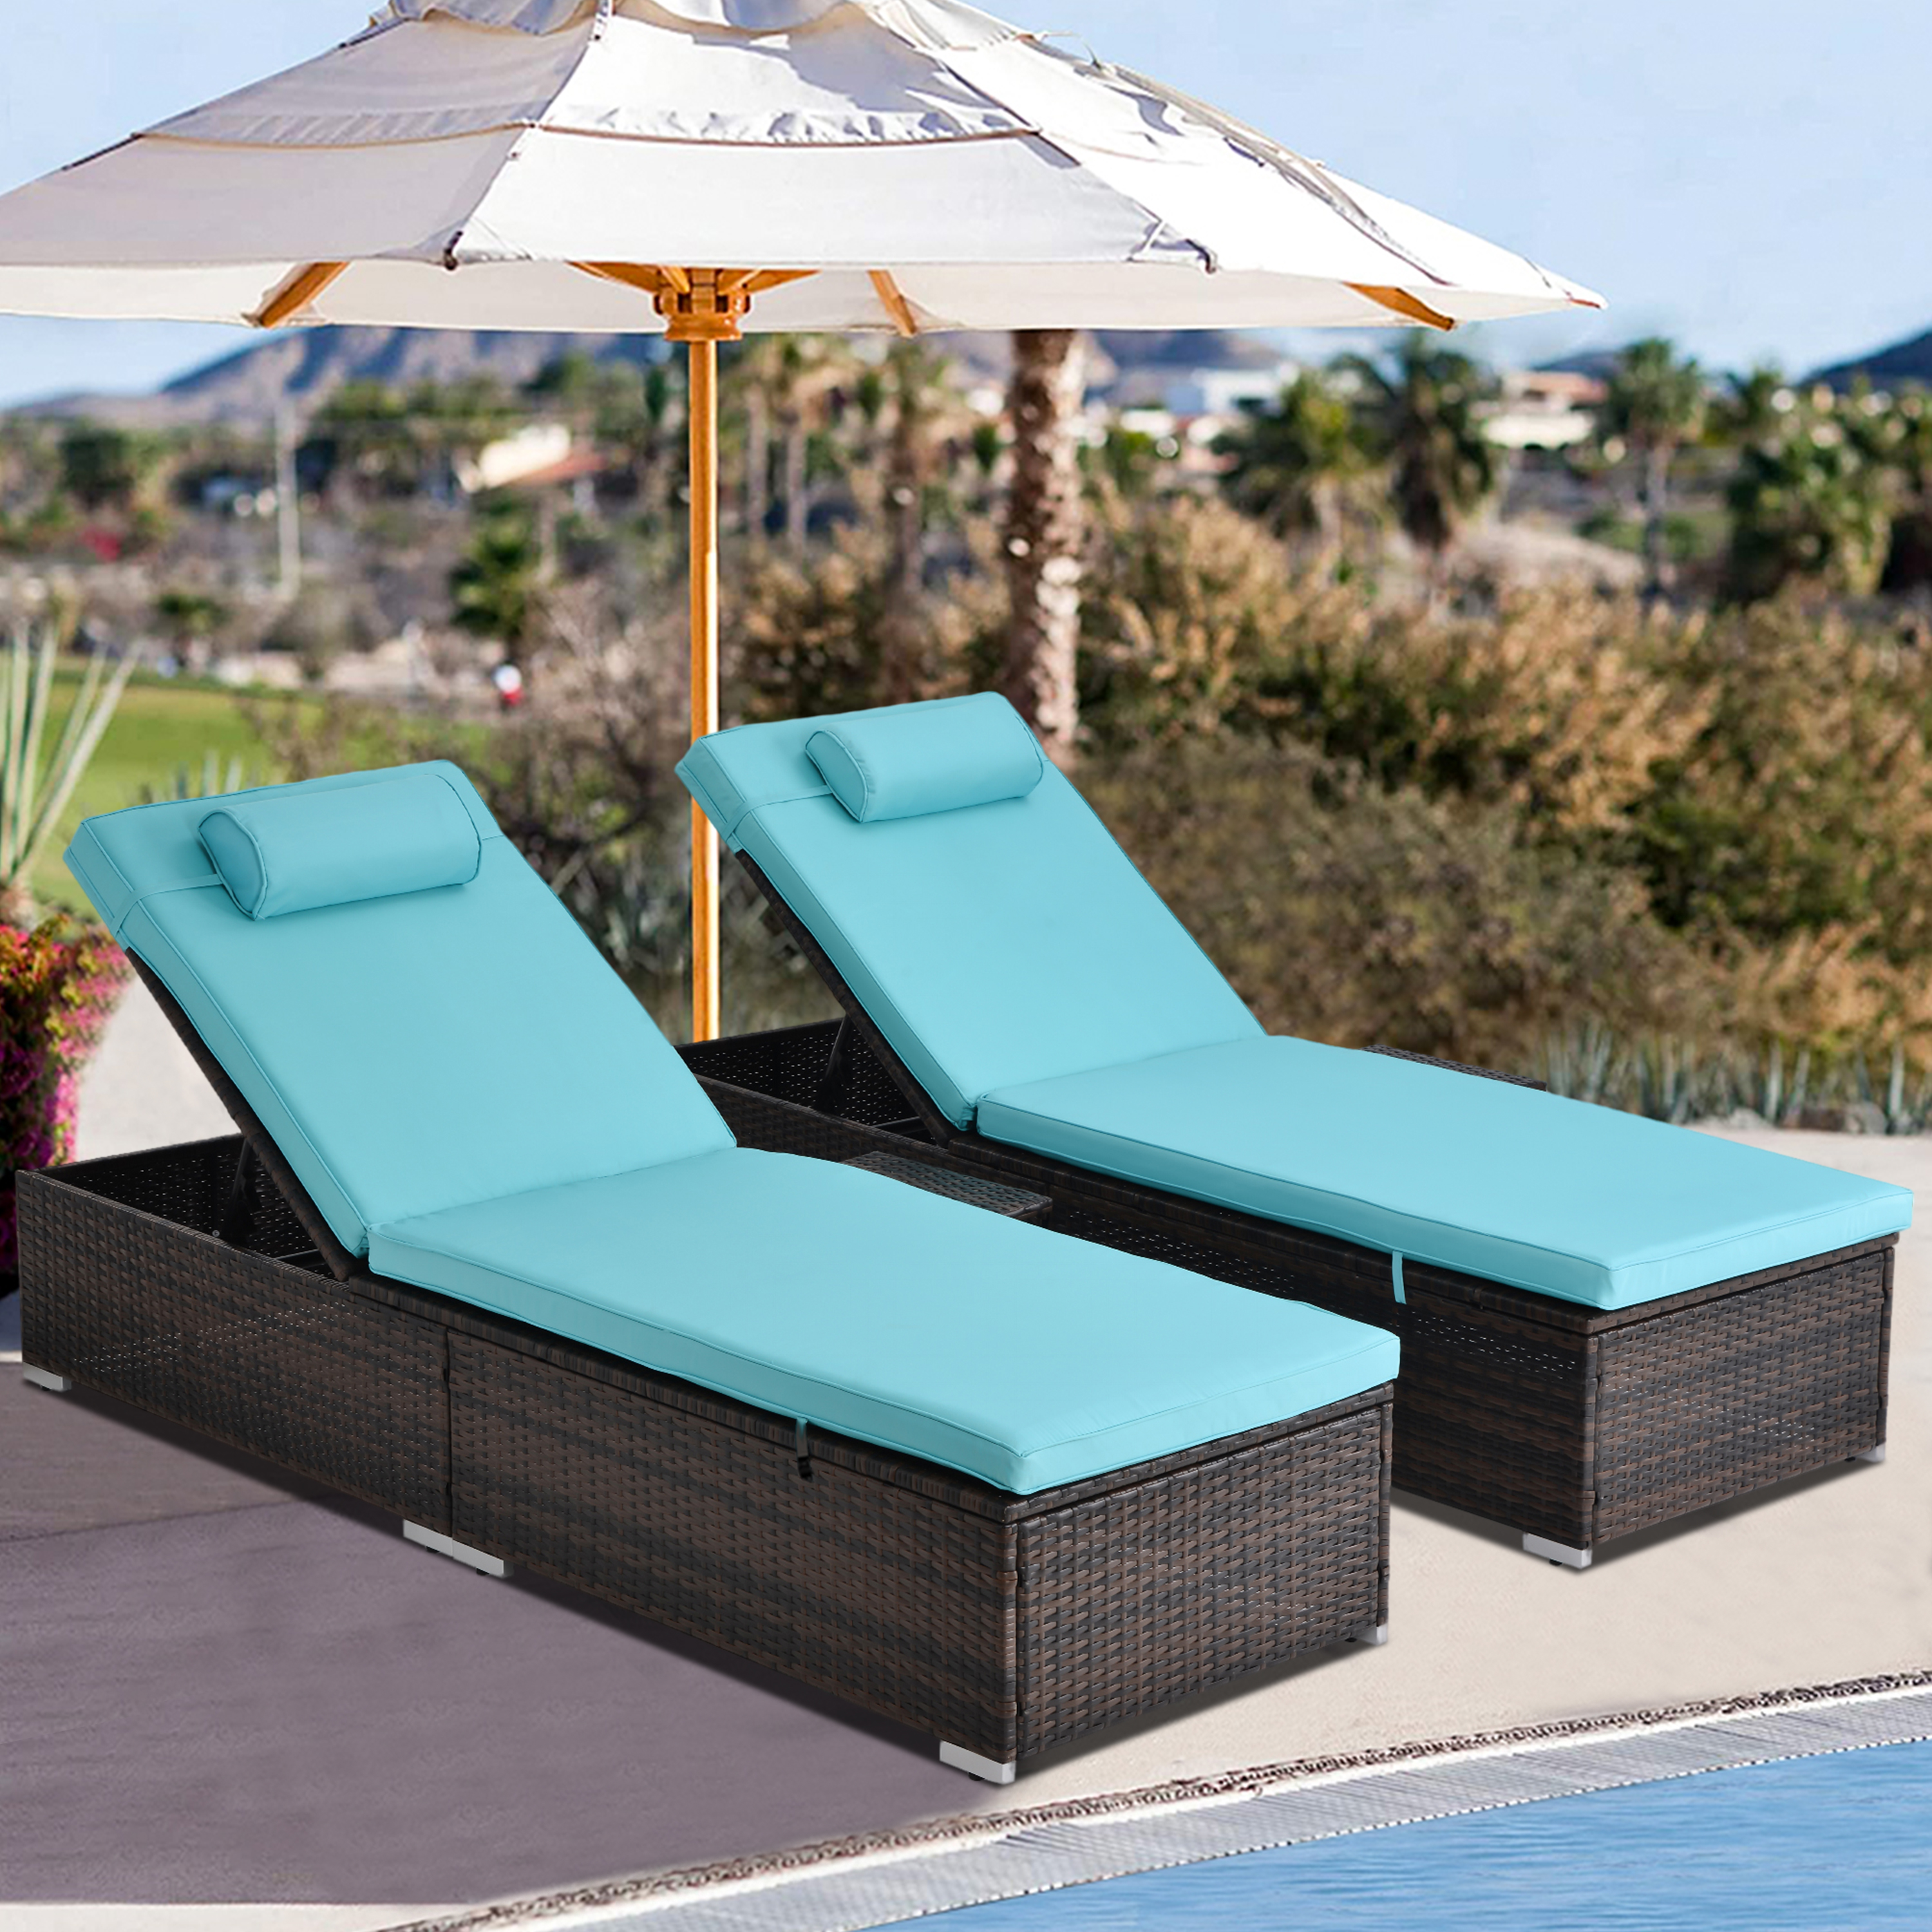 Segmart Outdoor Patio Chaise Lounge Chairs Furniture Set, PE Rattan Wicker Beach Pool Lounge Chair with Side Table, Adjustable 5 Position, Reclining Chaise Chairs, Blue, SS2344 - image 2 of 8